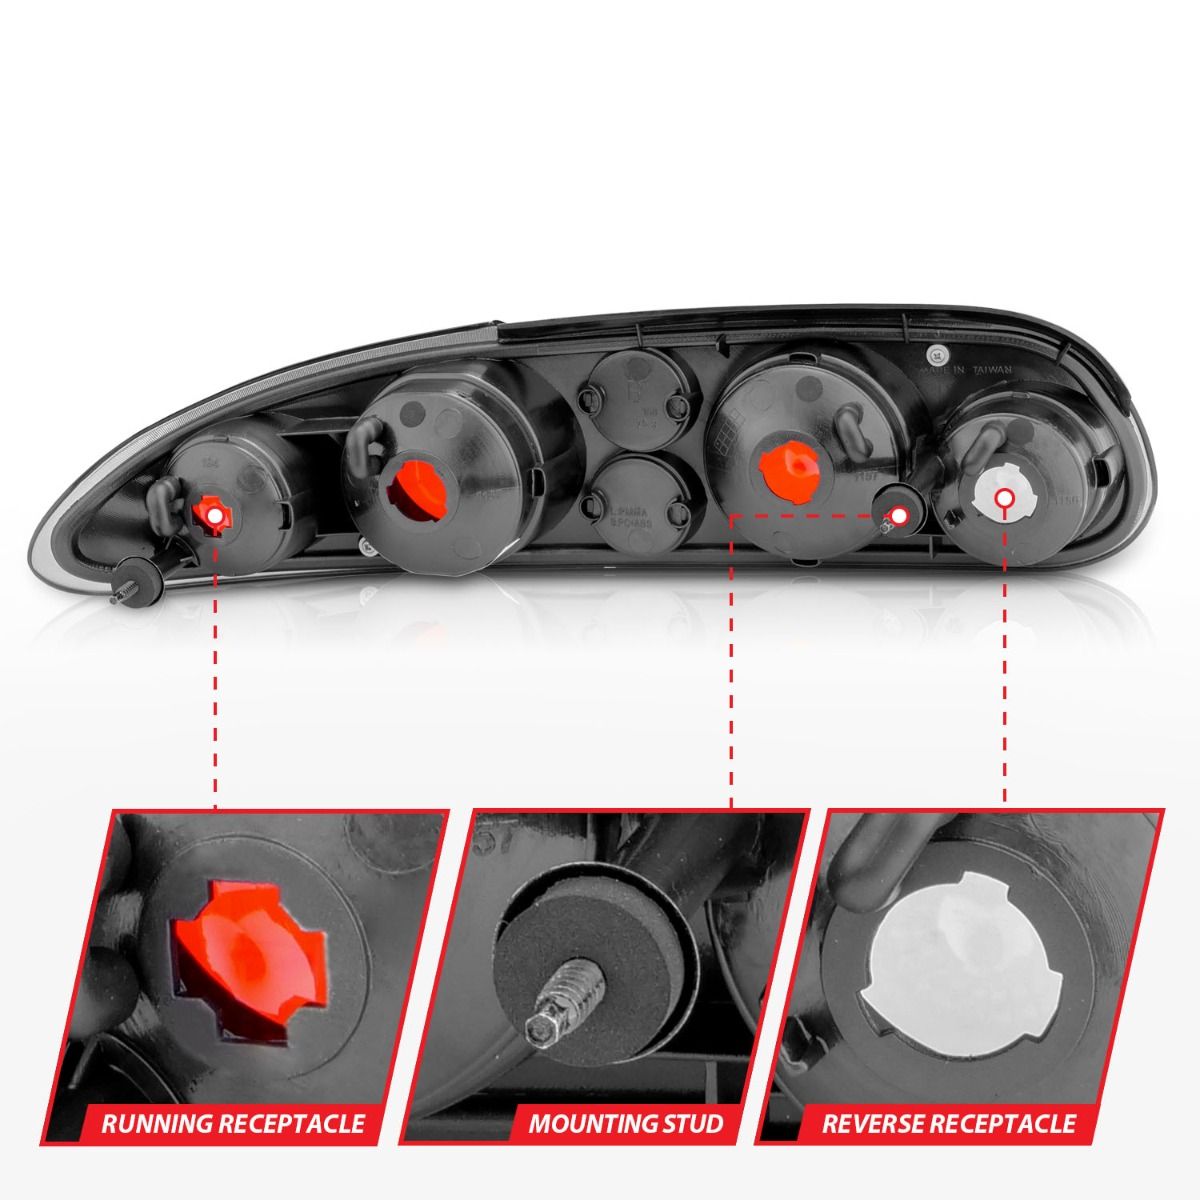 CHEVY TAIL LIGHTS, CHEVY CAMARO TAIL LIGHTS, CHEVY 93-02 TAIL LIGHTS, TAIL LIGHTS, BLACK TAIL LIGHTS, Anzo TAIL LIGHTS